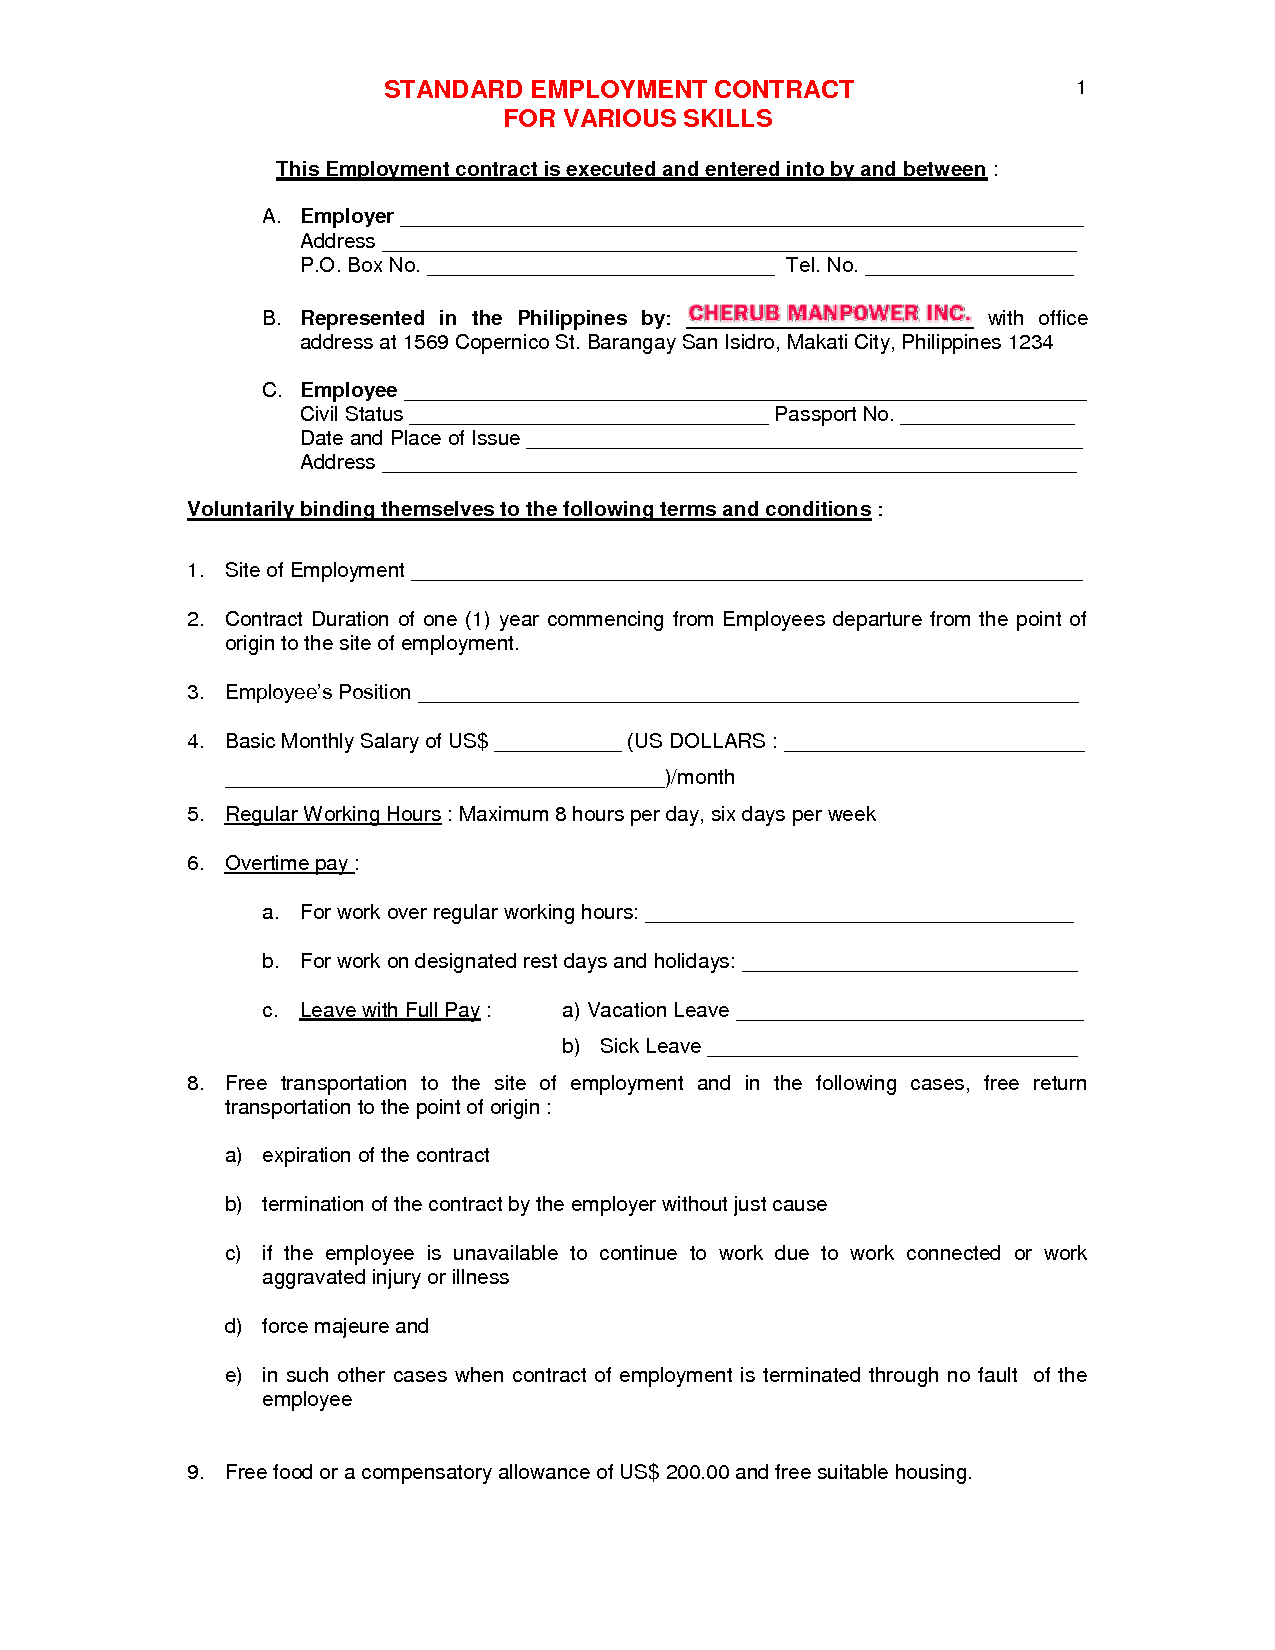 Free Employment Contract Agreement Template Image Gallery - Imggrid - Free Printable Employment Contracts